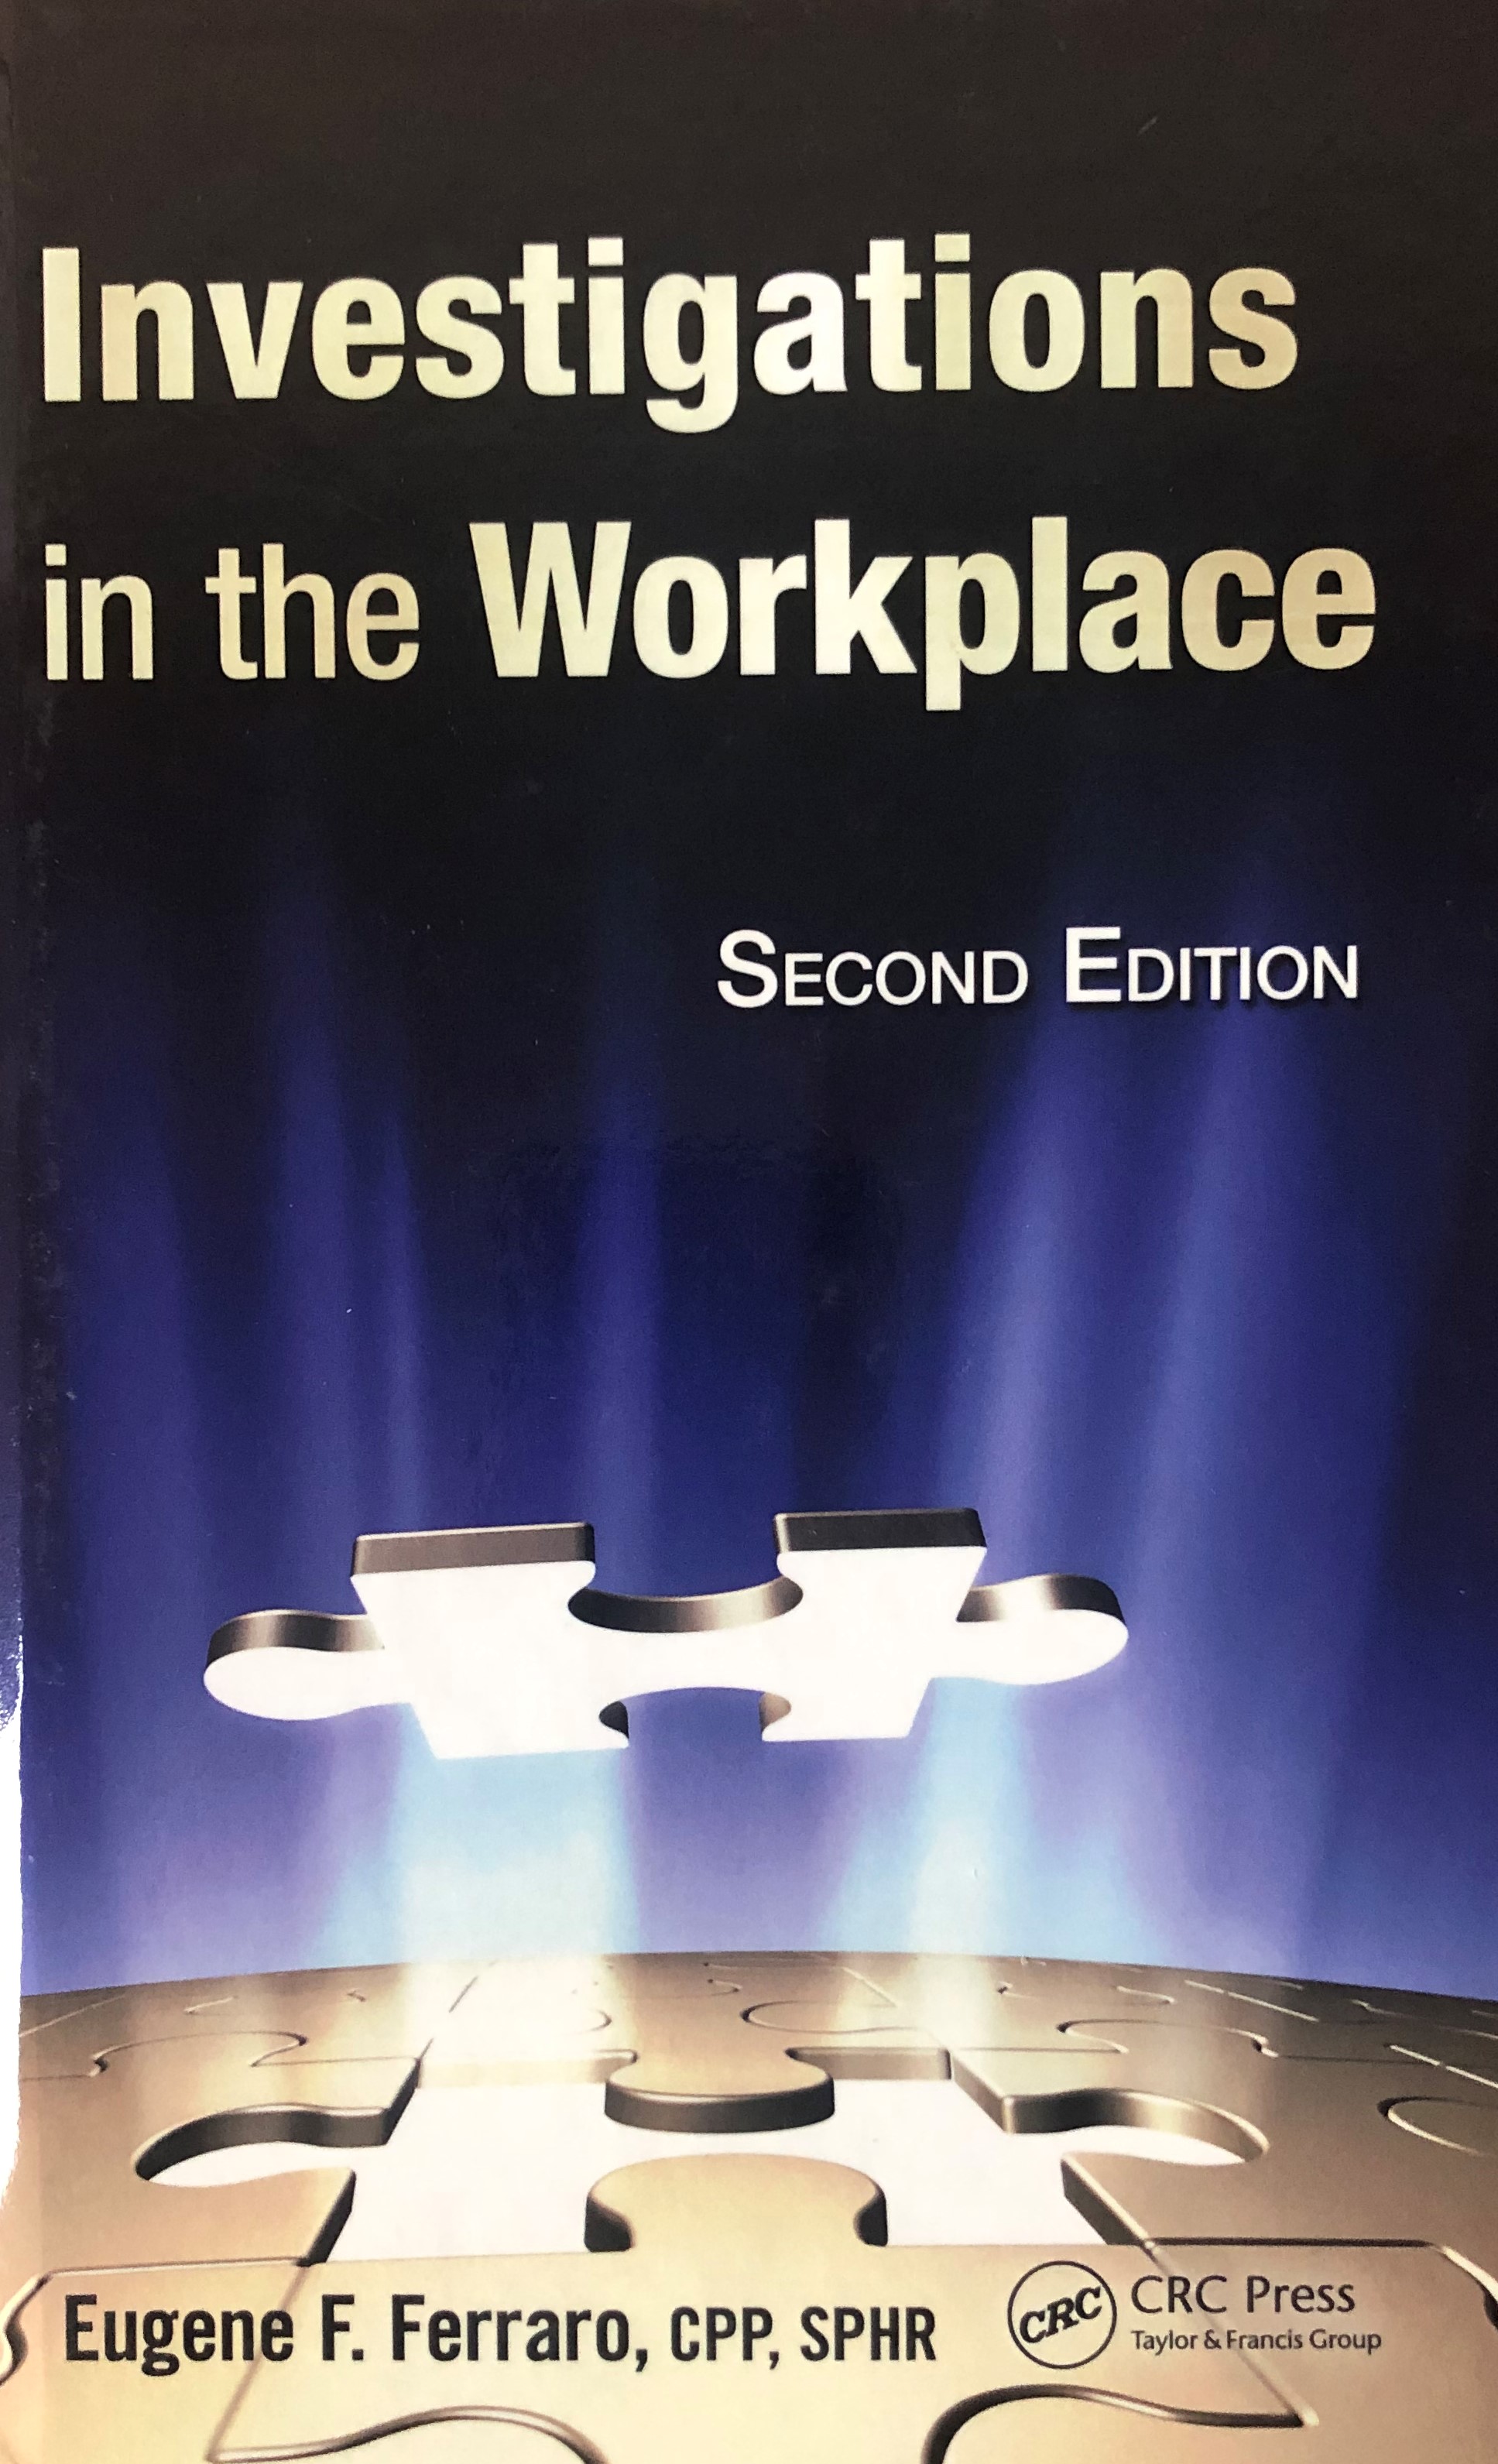 Description Investigations in the Workplace